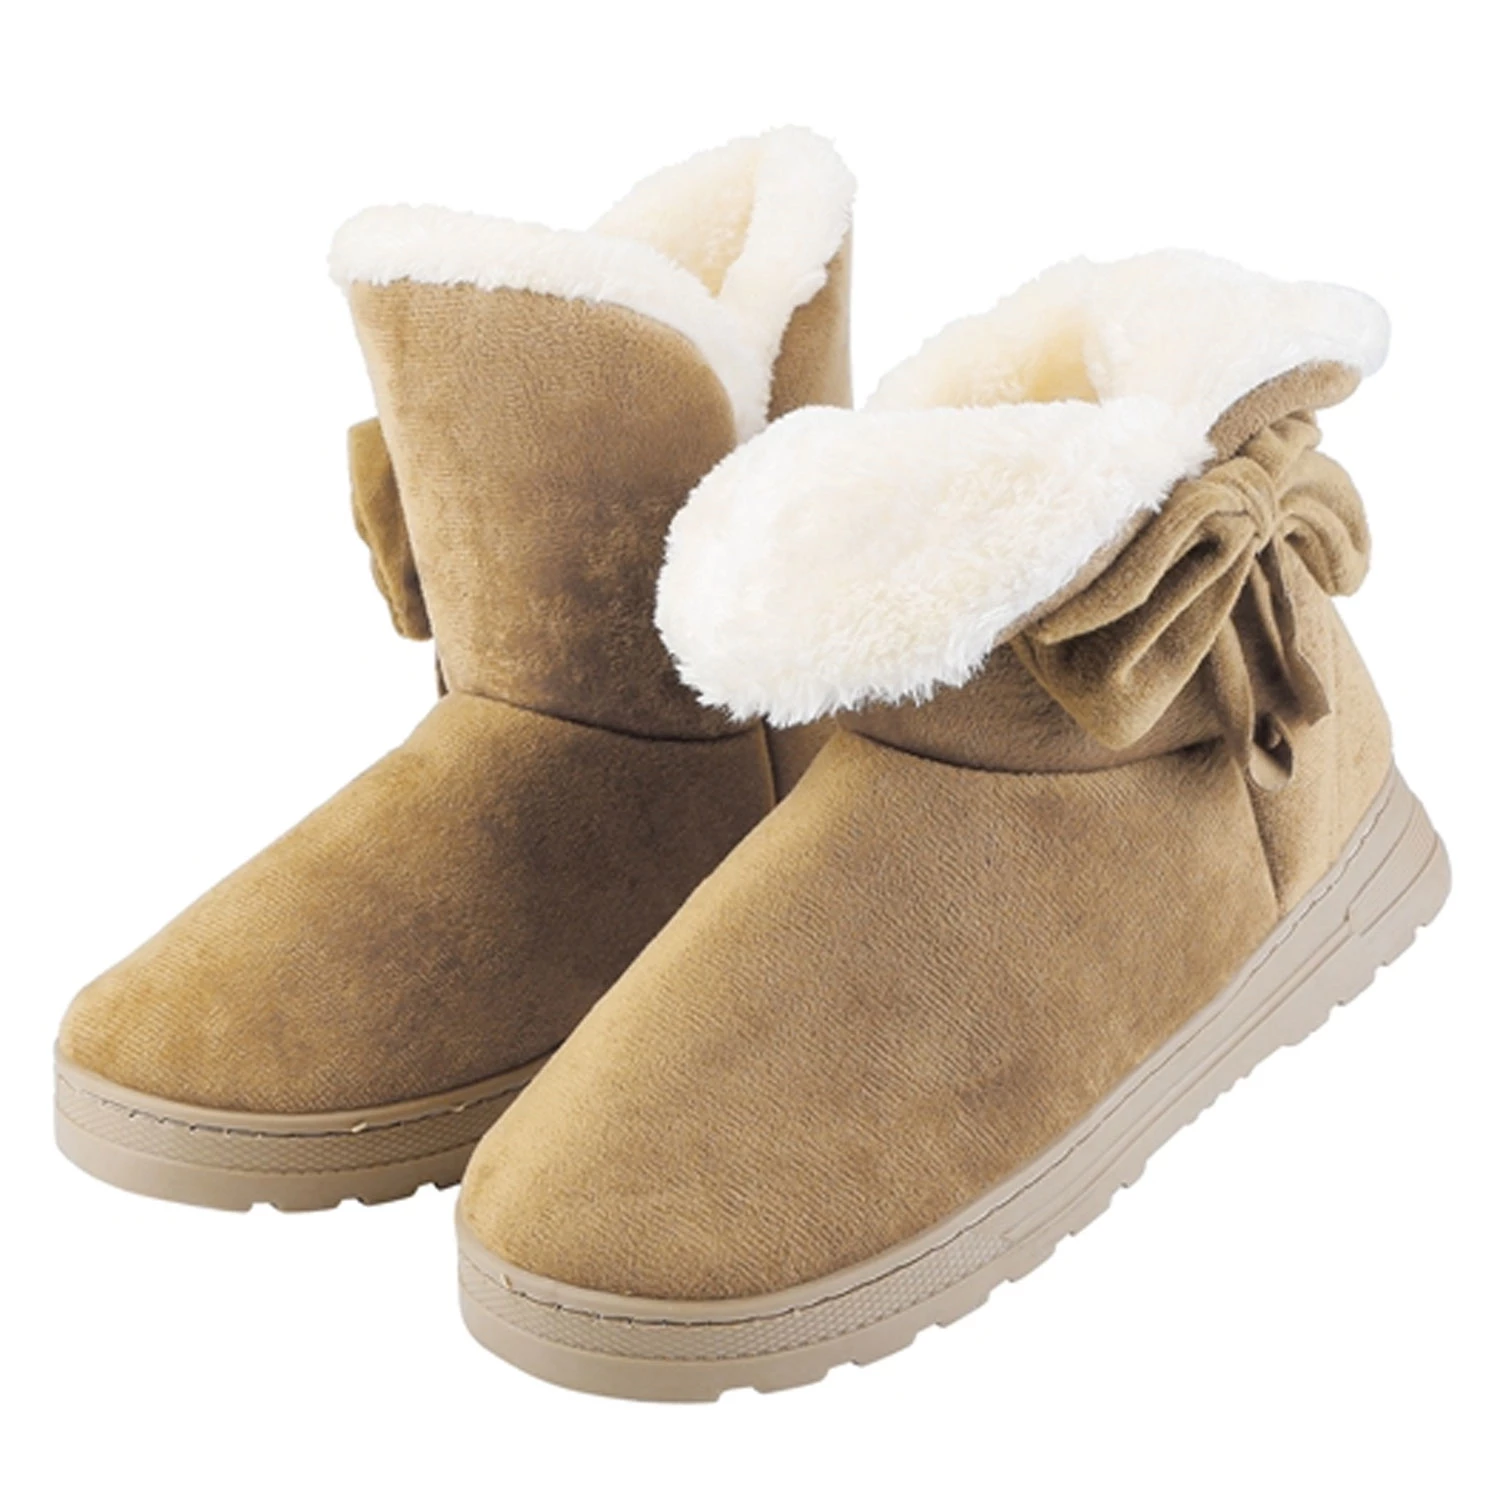 Women Ladies Snow Boots Super Soft Fabric Mid-Calf Winter Shoes Thickened Plush Warm Lining Shoes